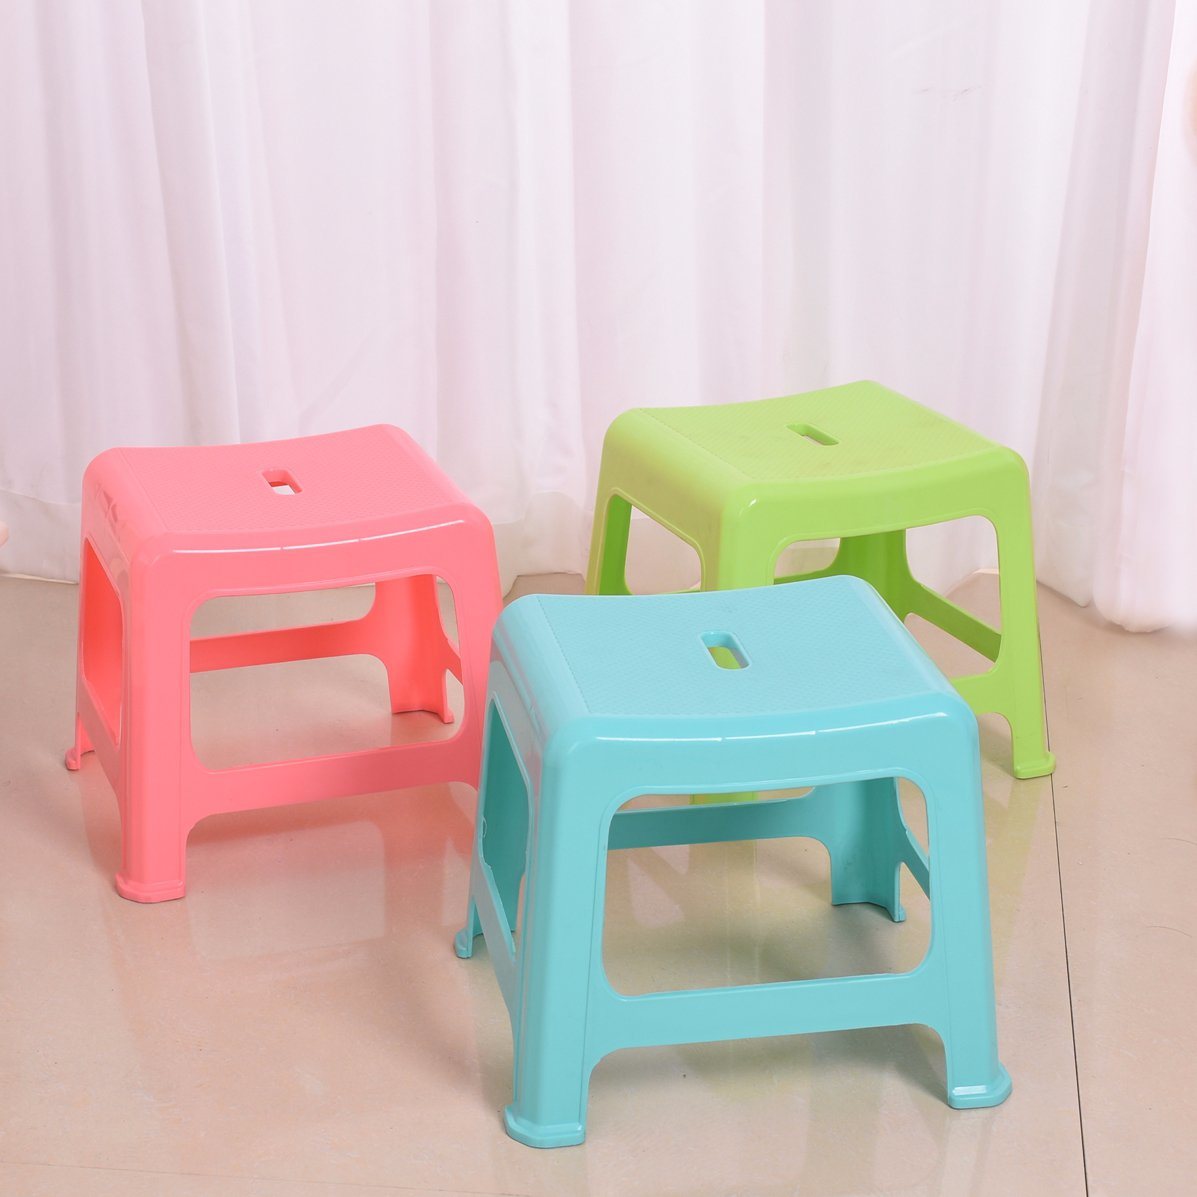 Comfortable Abrasive Surface Square Home Furniture Small Plastic Stool for Kids